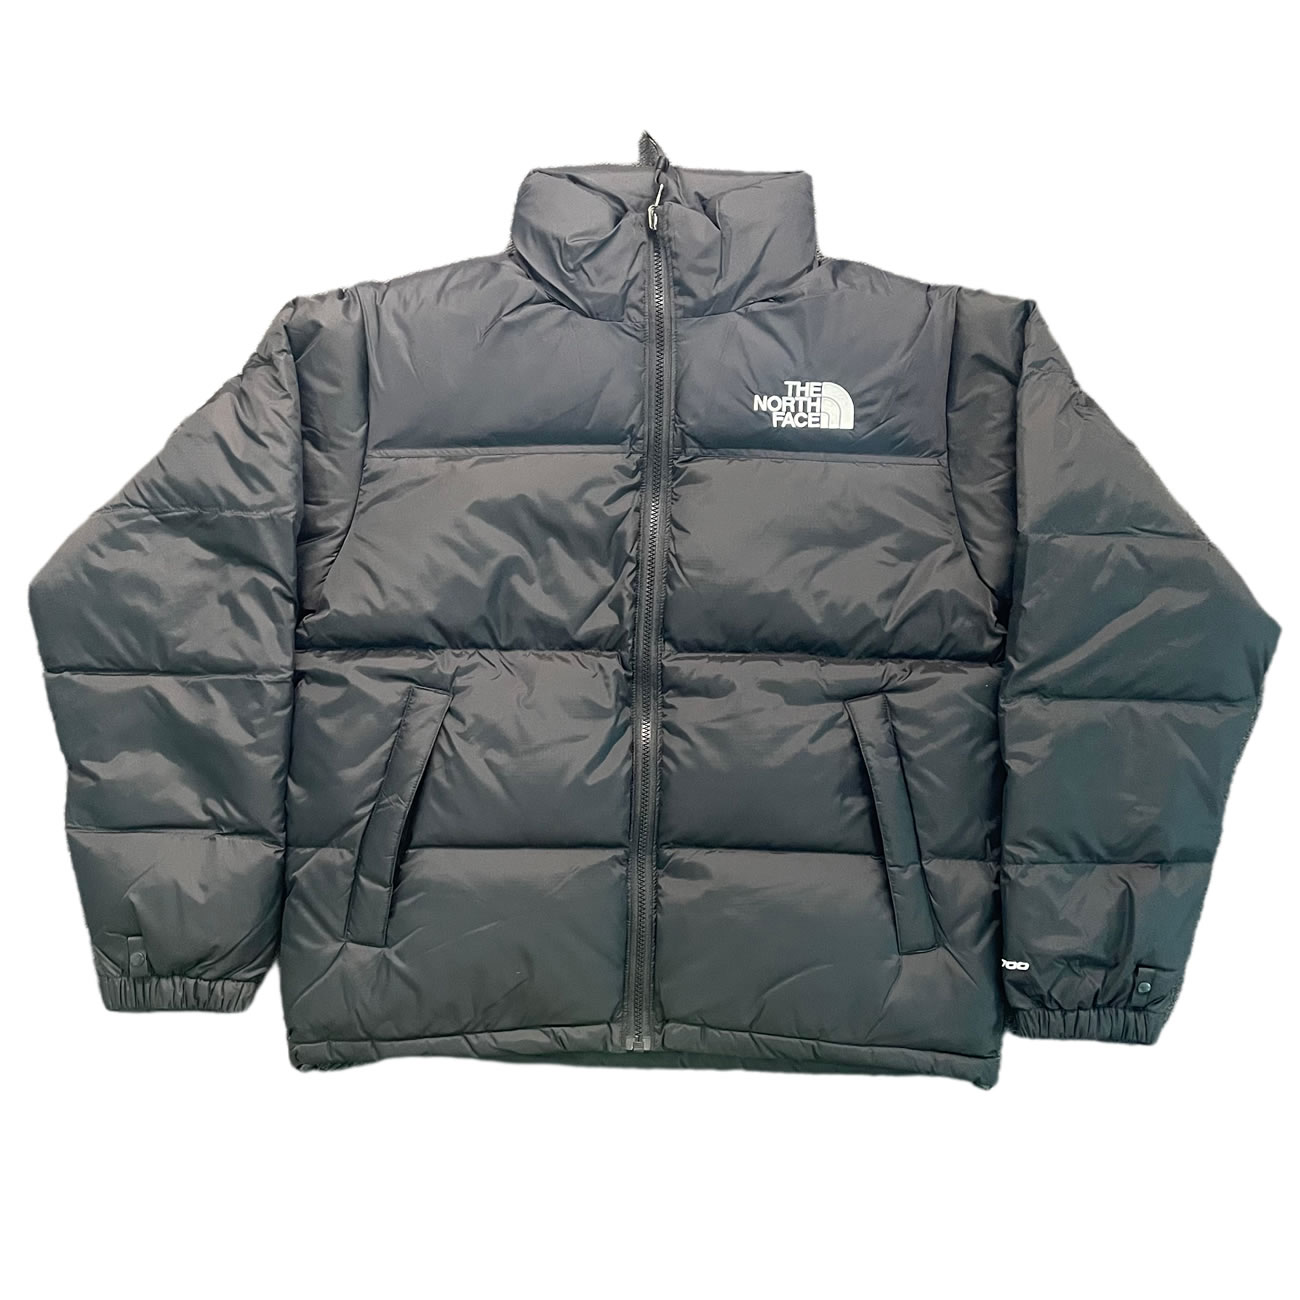 The North Face 1996 Retro Nuptse Packable Jacket Fw21 (5) - newkick.org